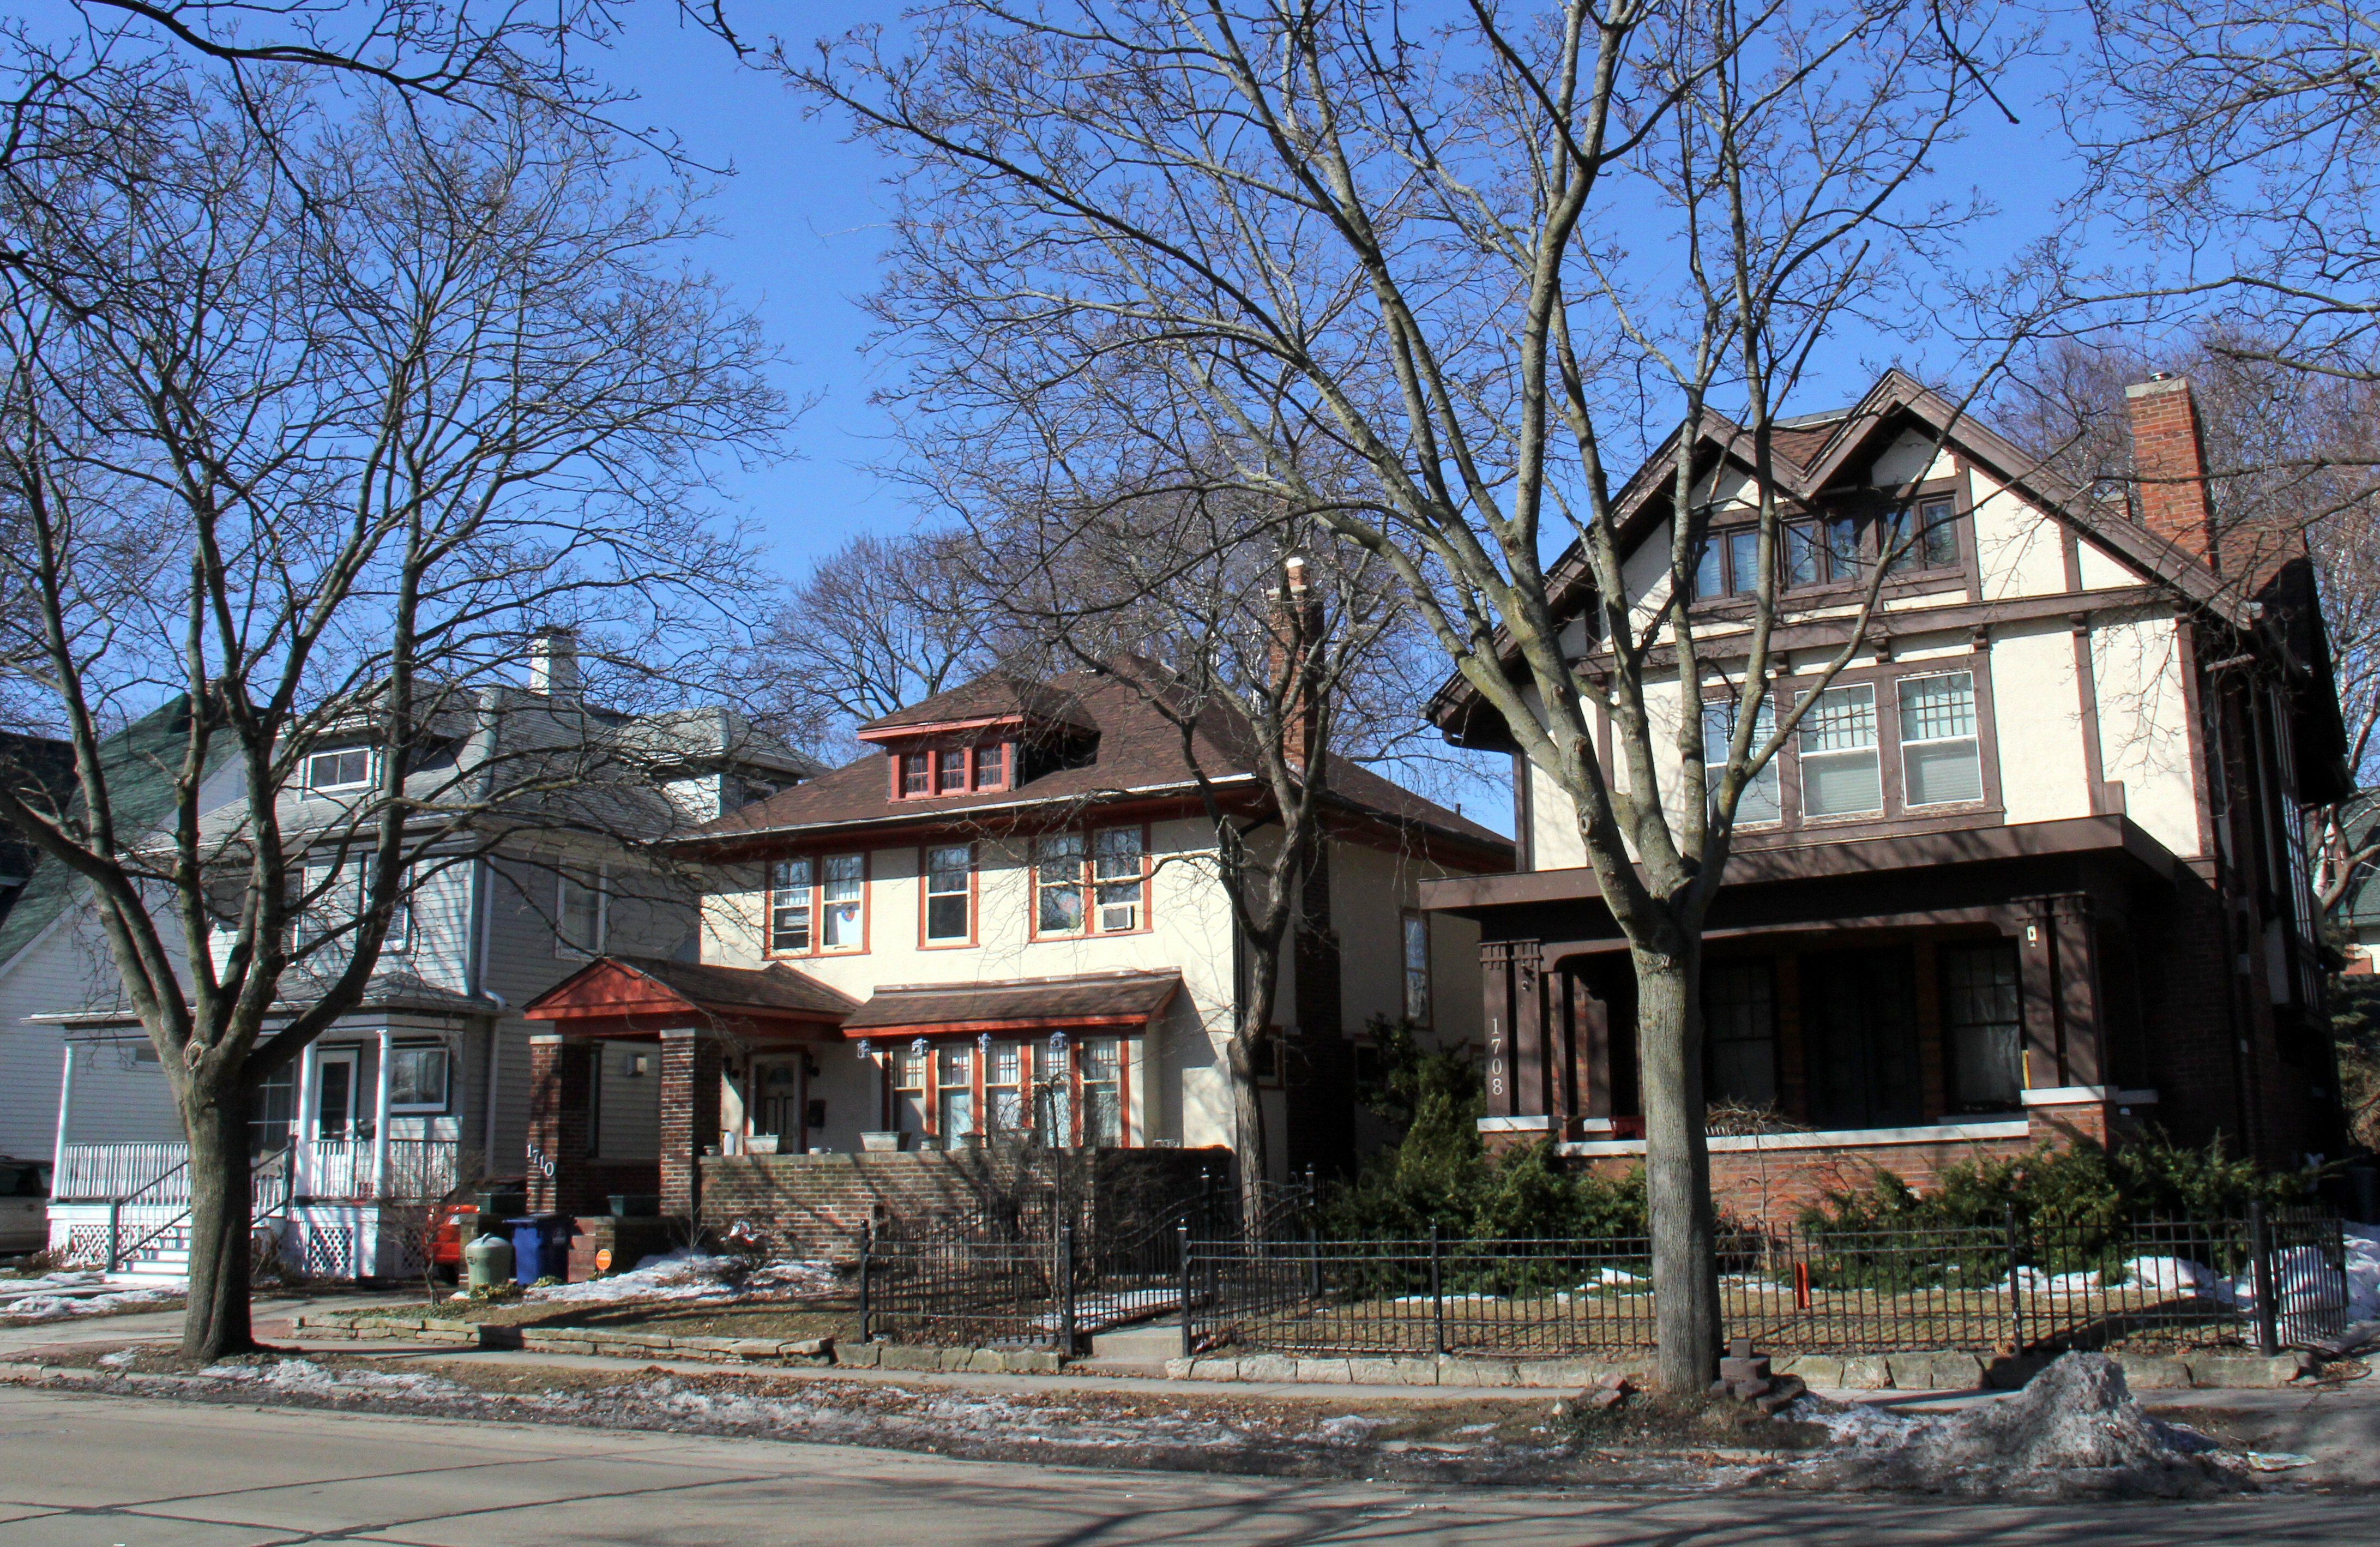 Suburban American street with three houses of various revival stylings close together and close to the sidewalk